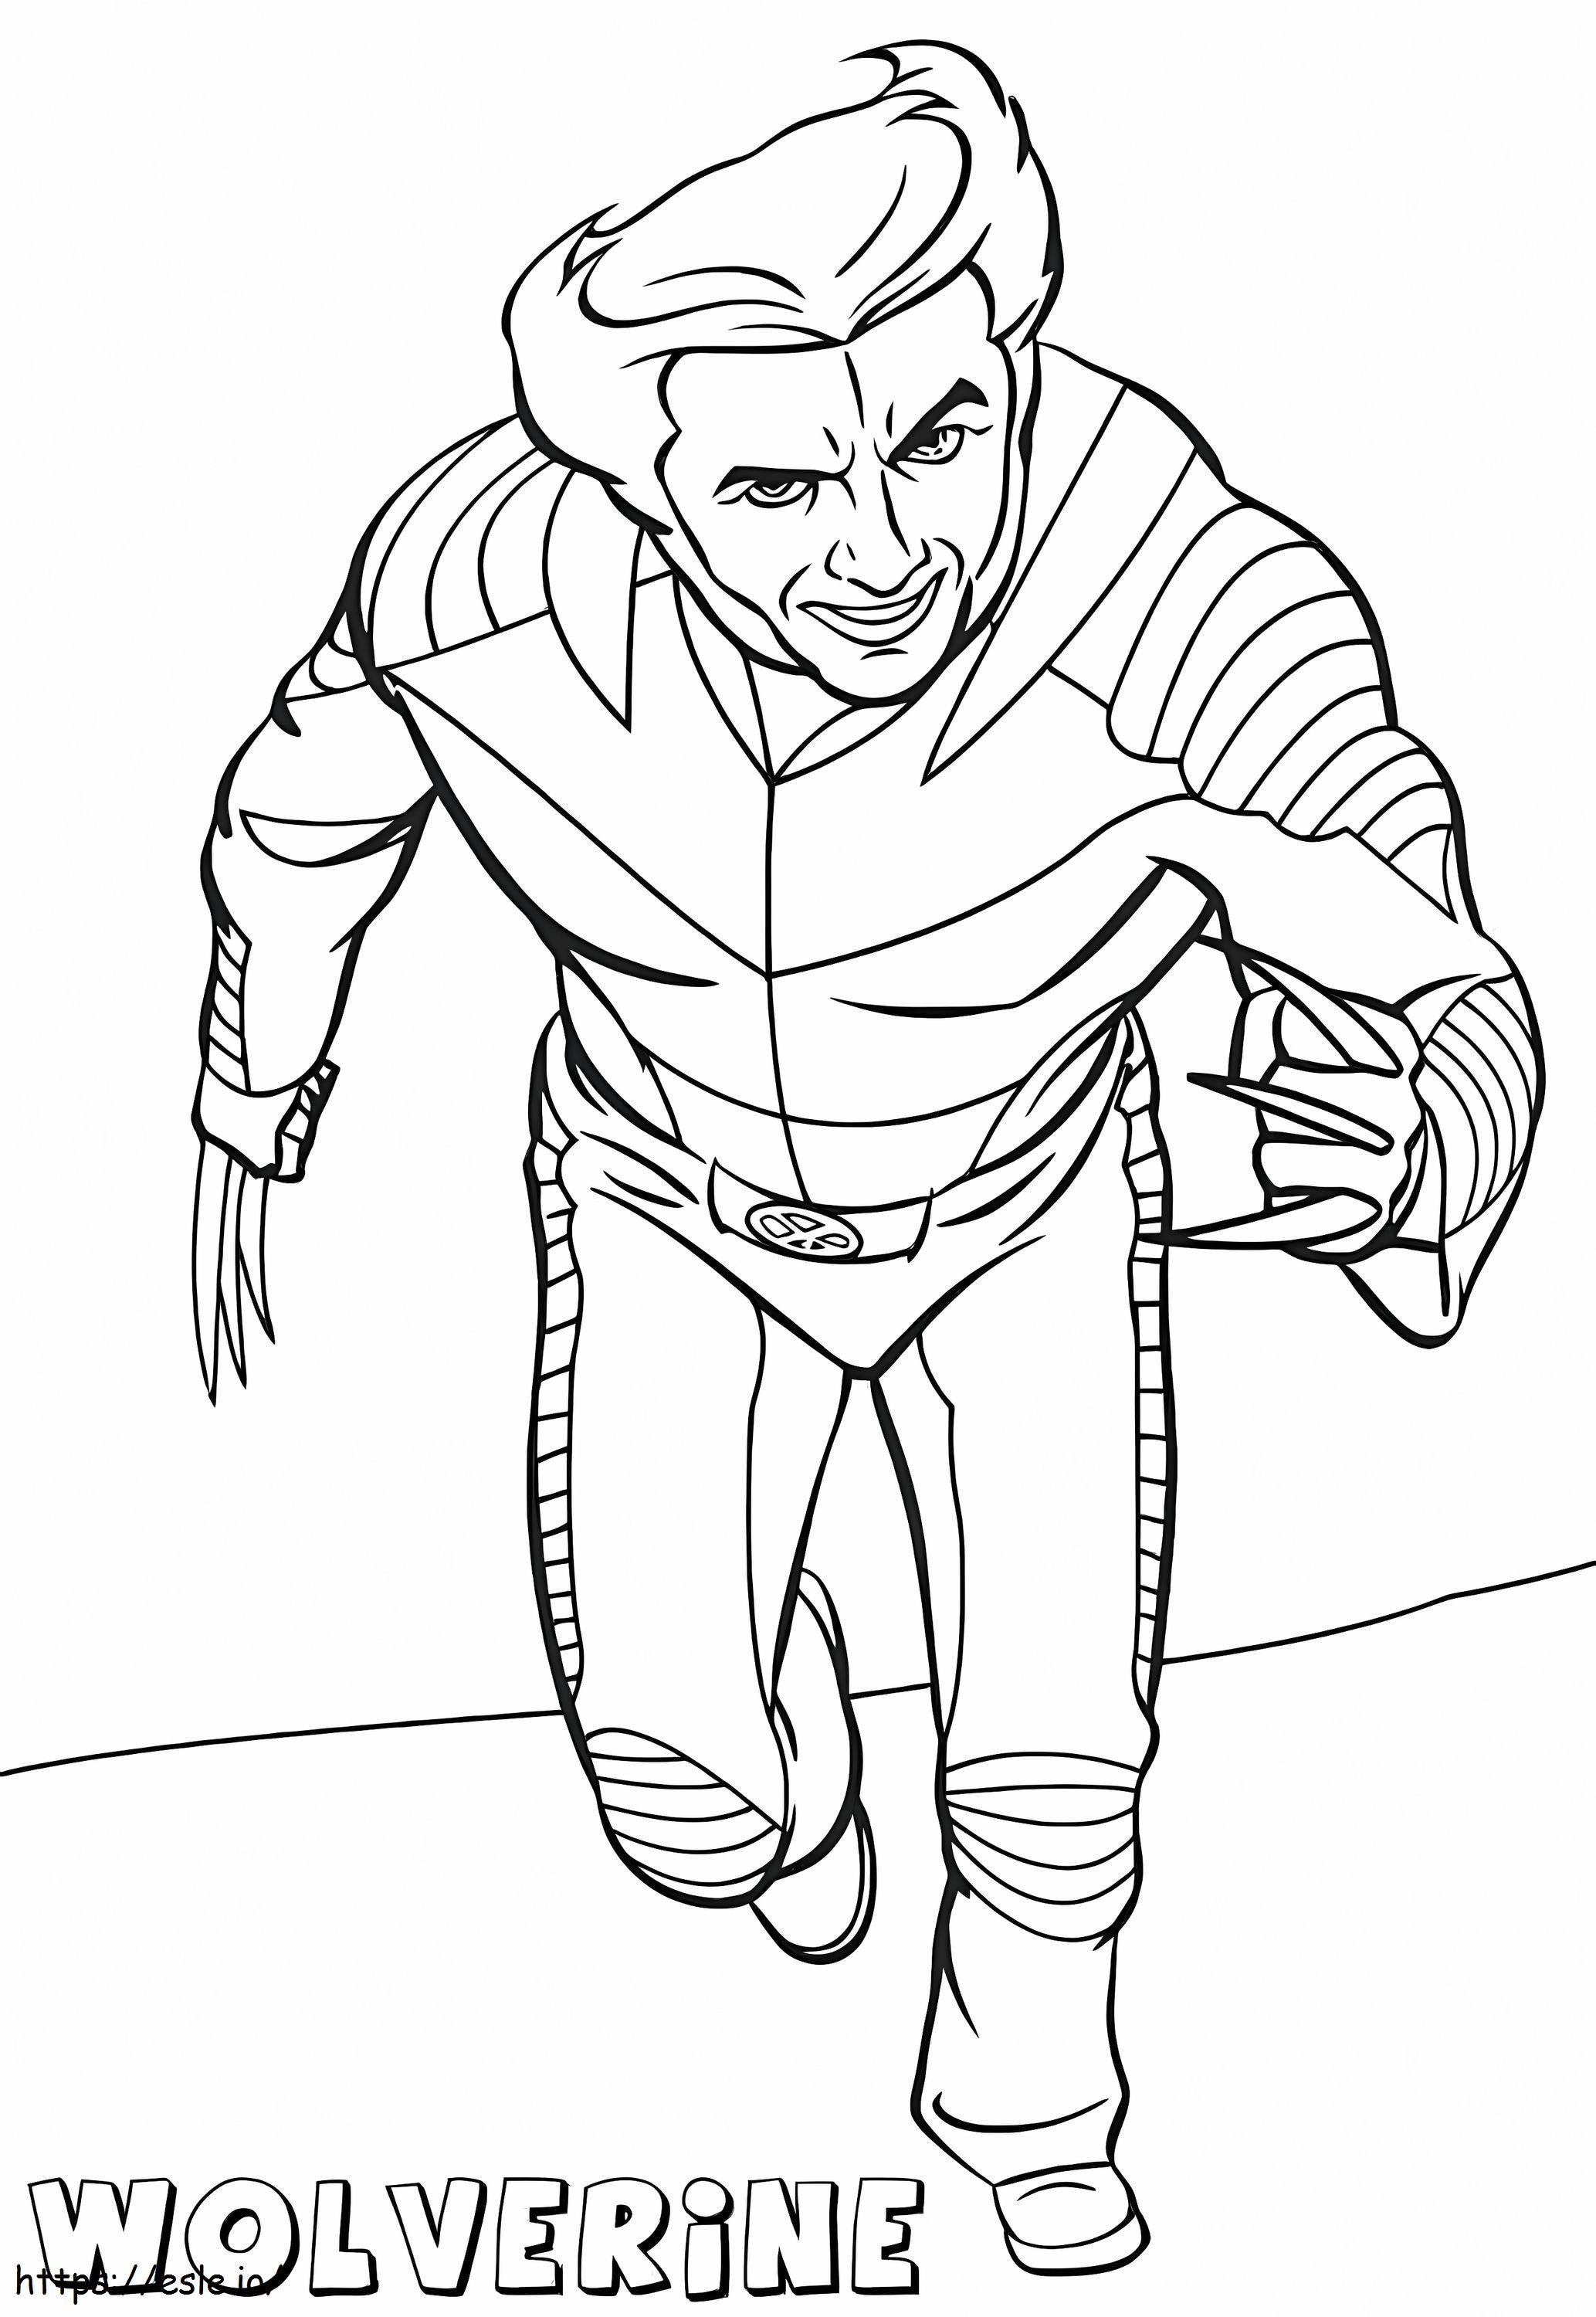 Wolverine Is Running coloring page